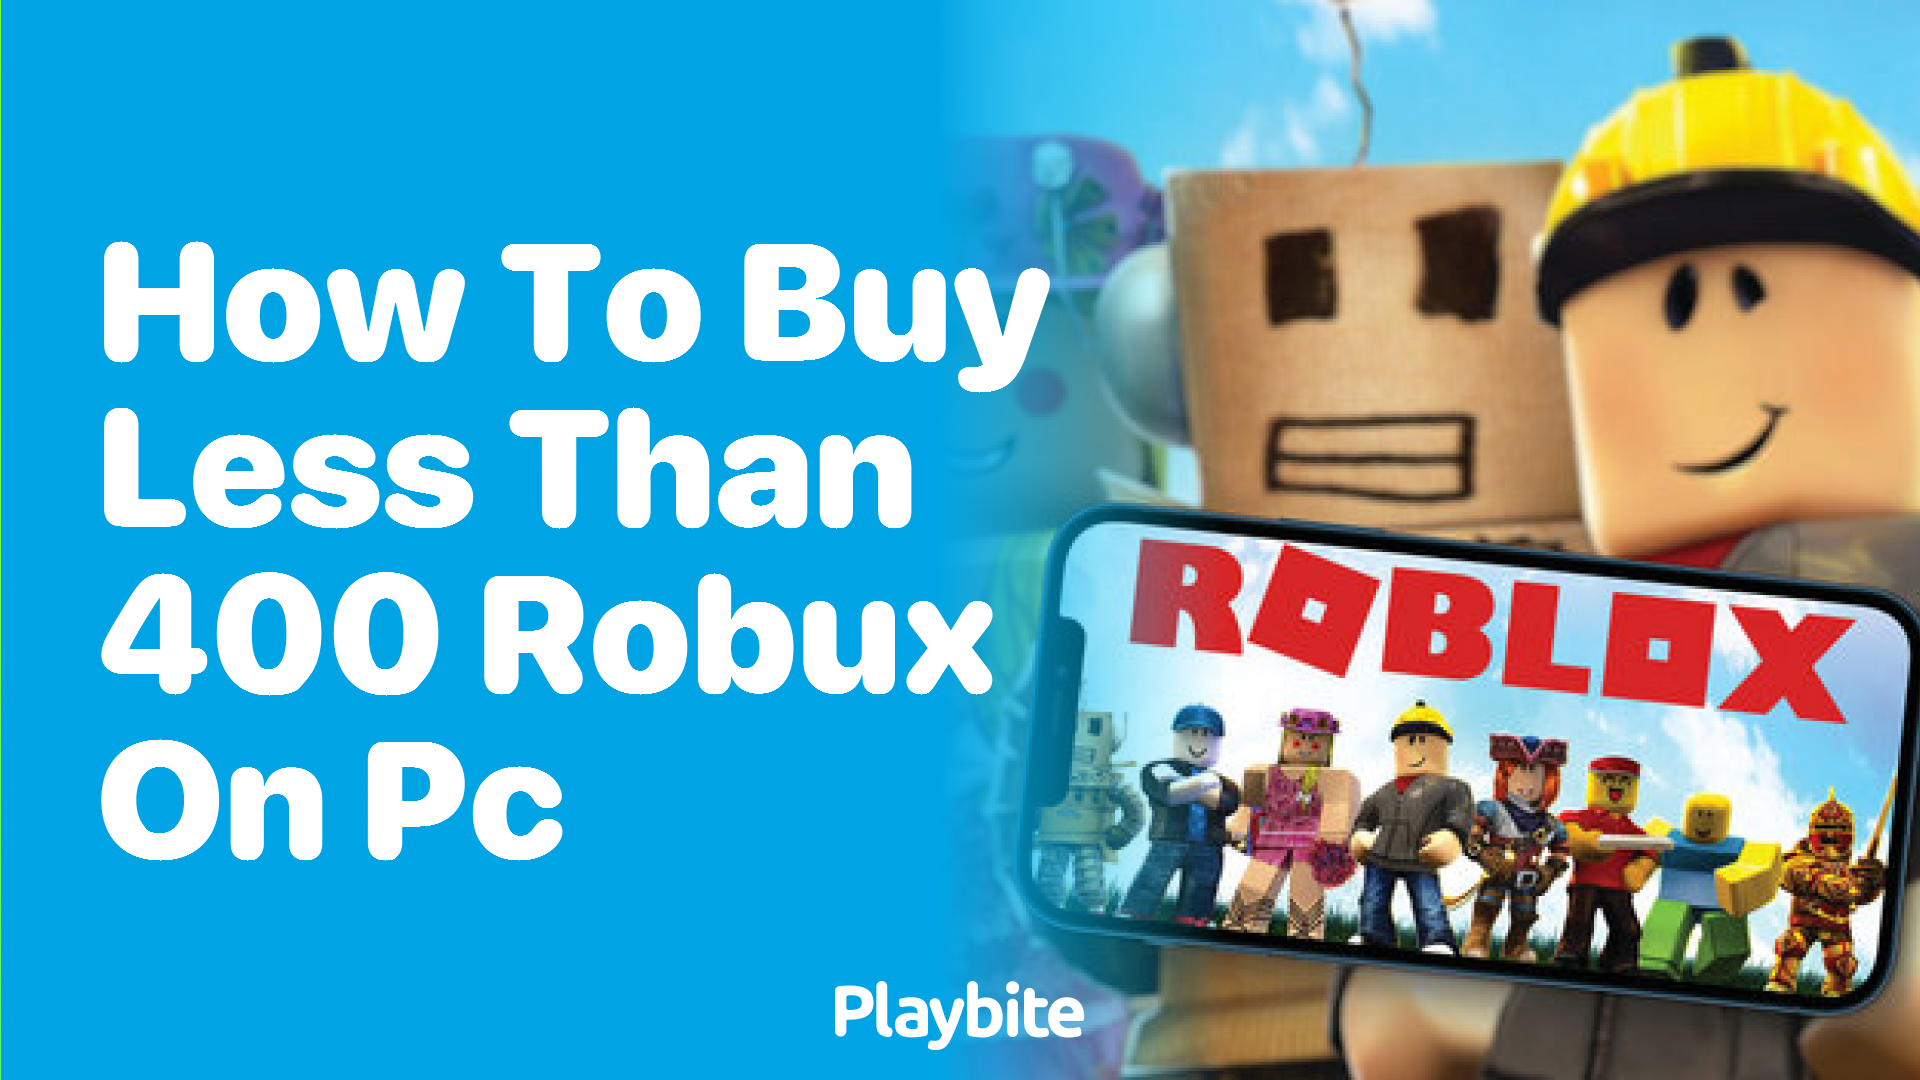 How to Buy Less Than 400 Robux on PC: A Quick Guide